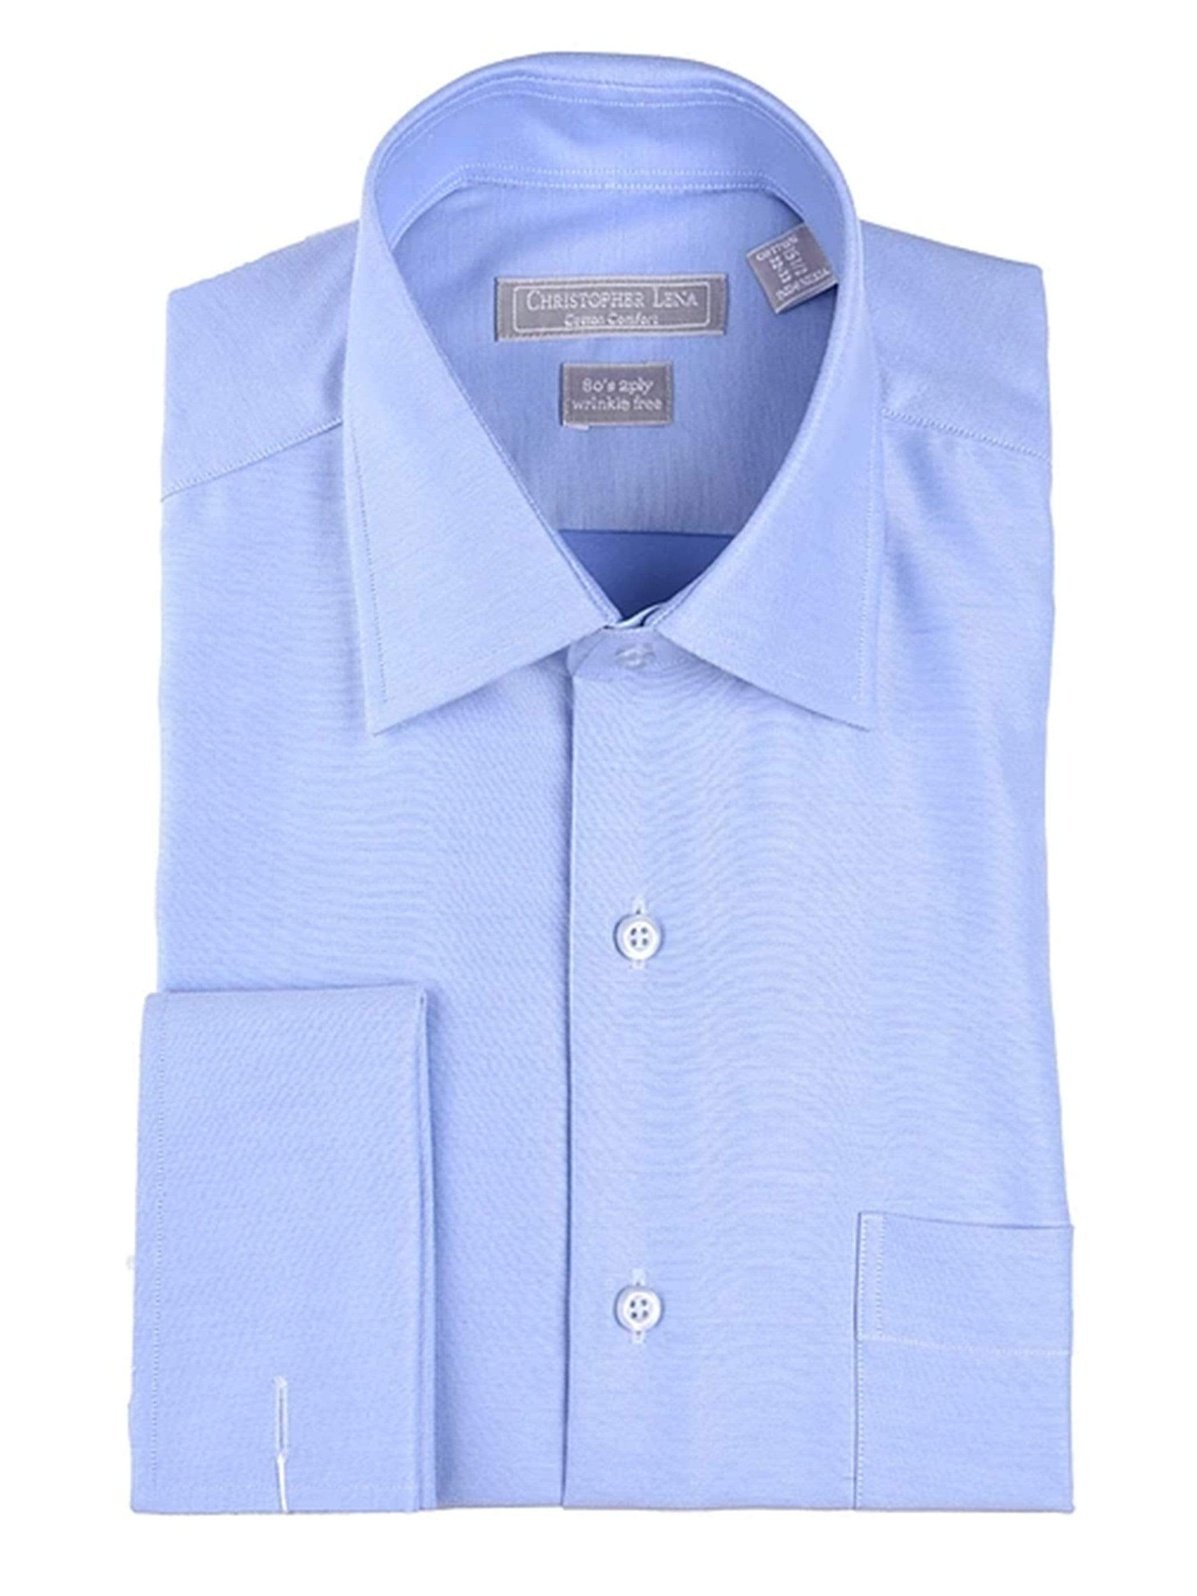 Christopher Lena SHIRTS 16 32/33 Blue Twill Spread Collar French Cuff Wrinkle Free 80s 2ply Cotton Dress Shirt